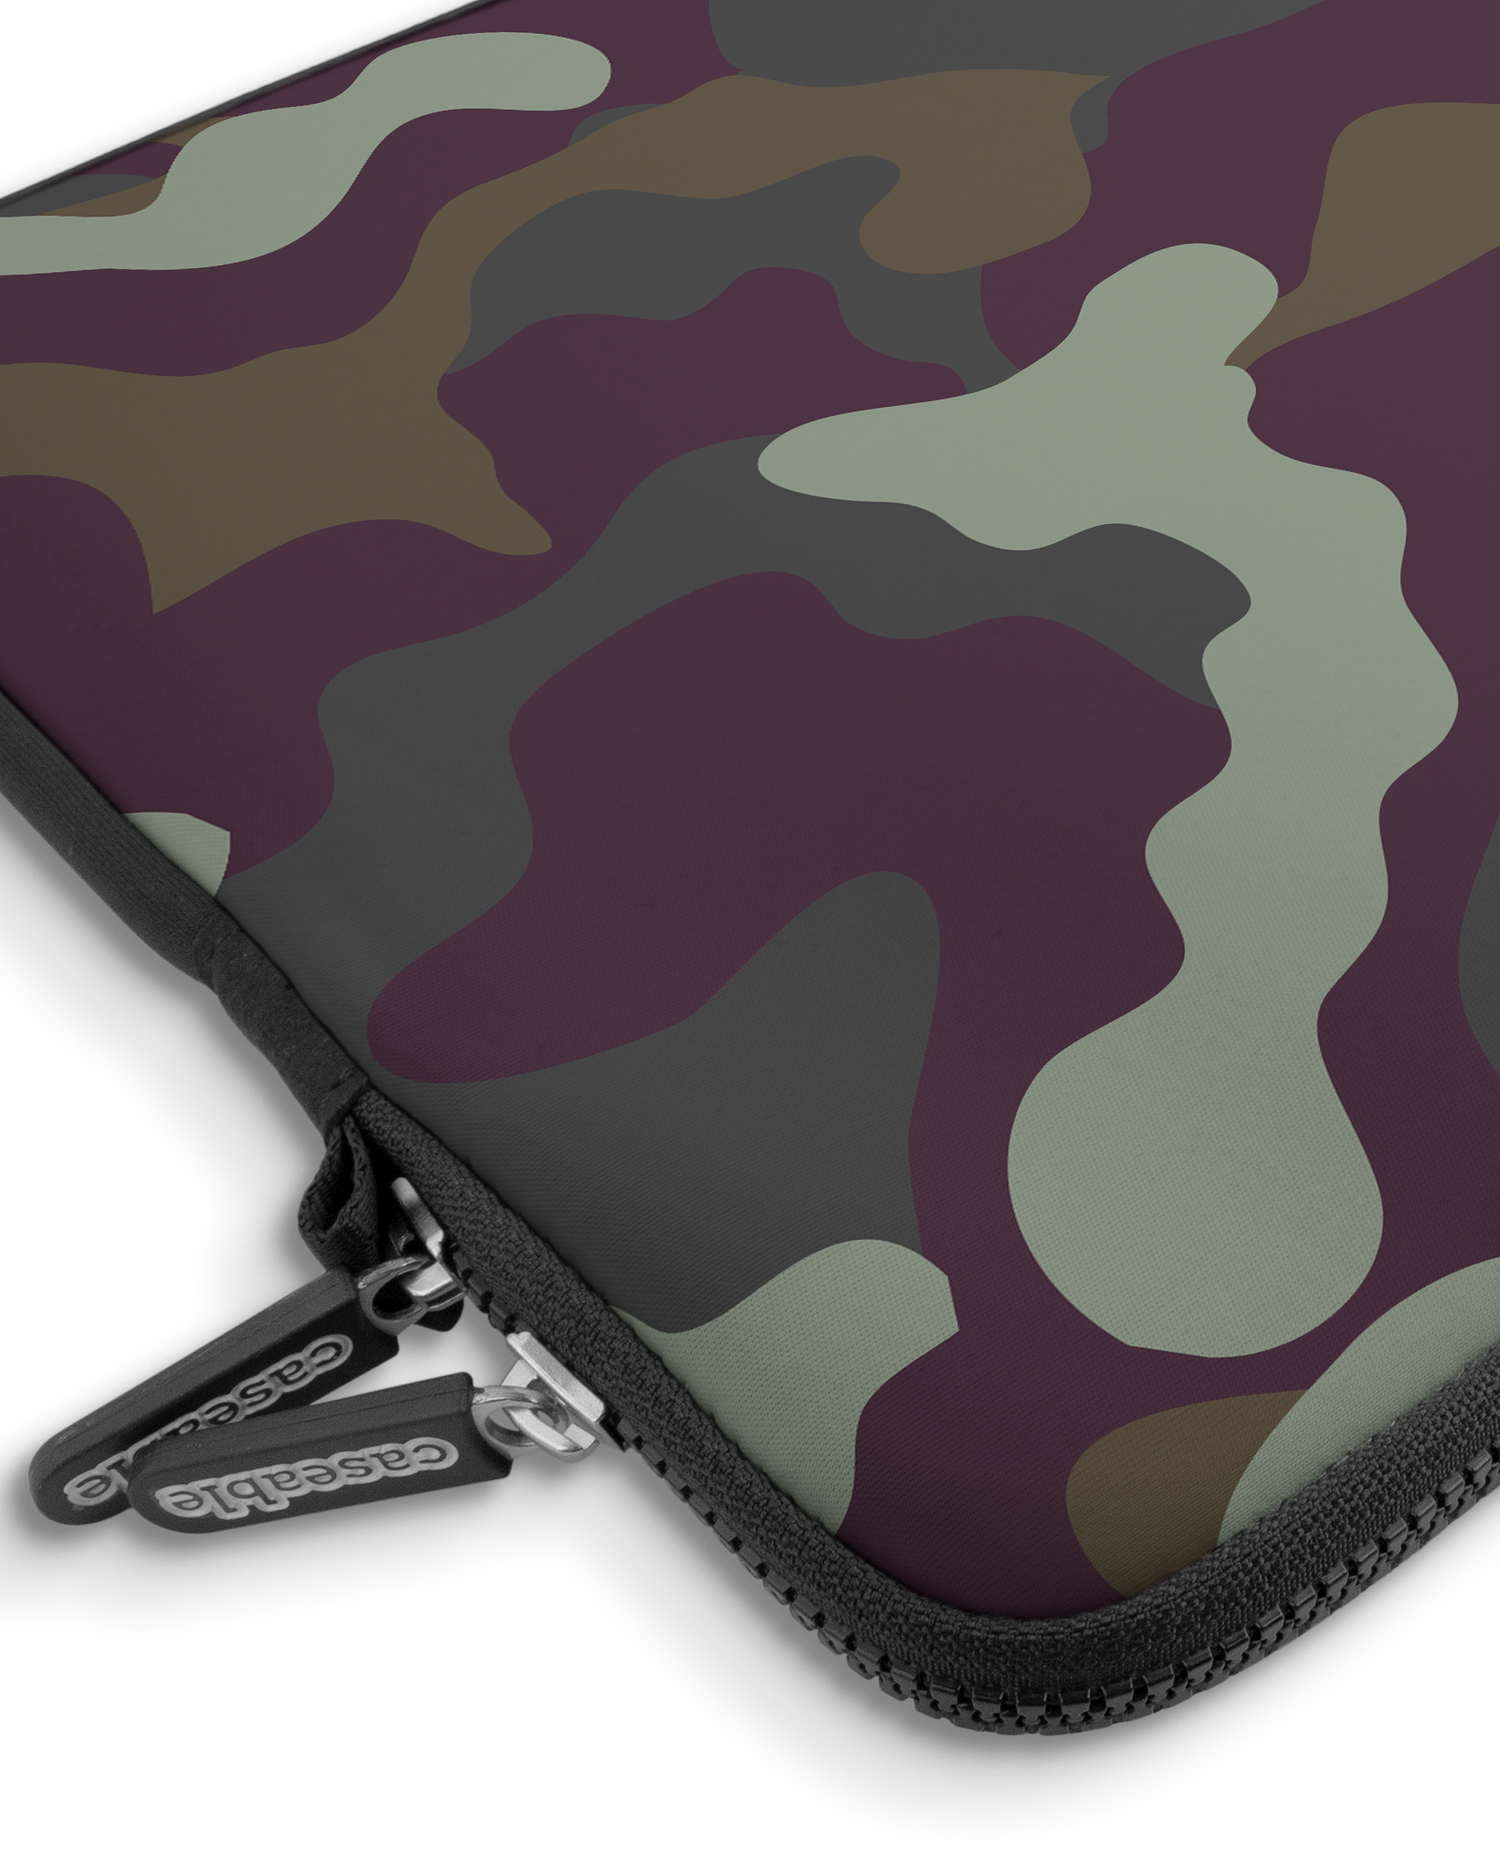 Night Camo Premium Laptop Bag 15 inch with device inside